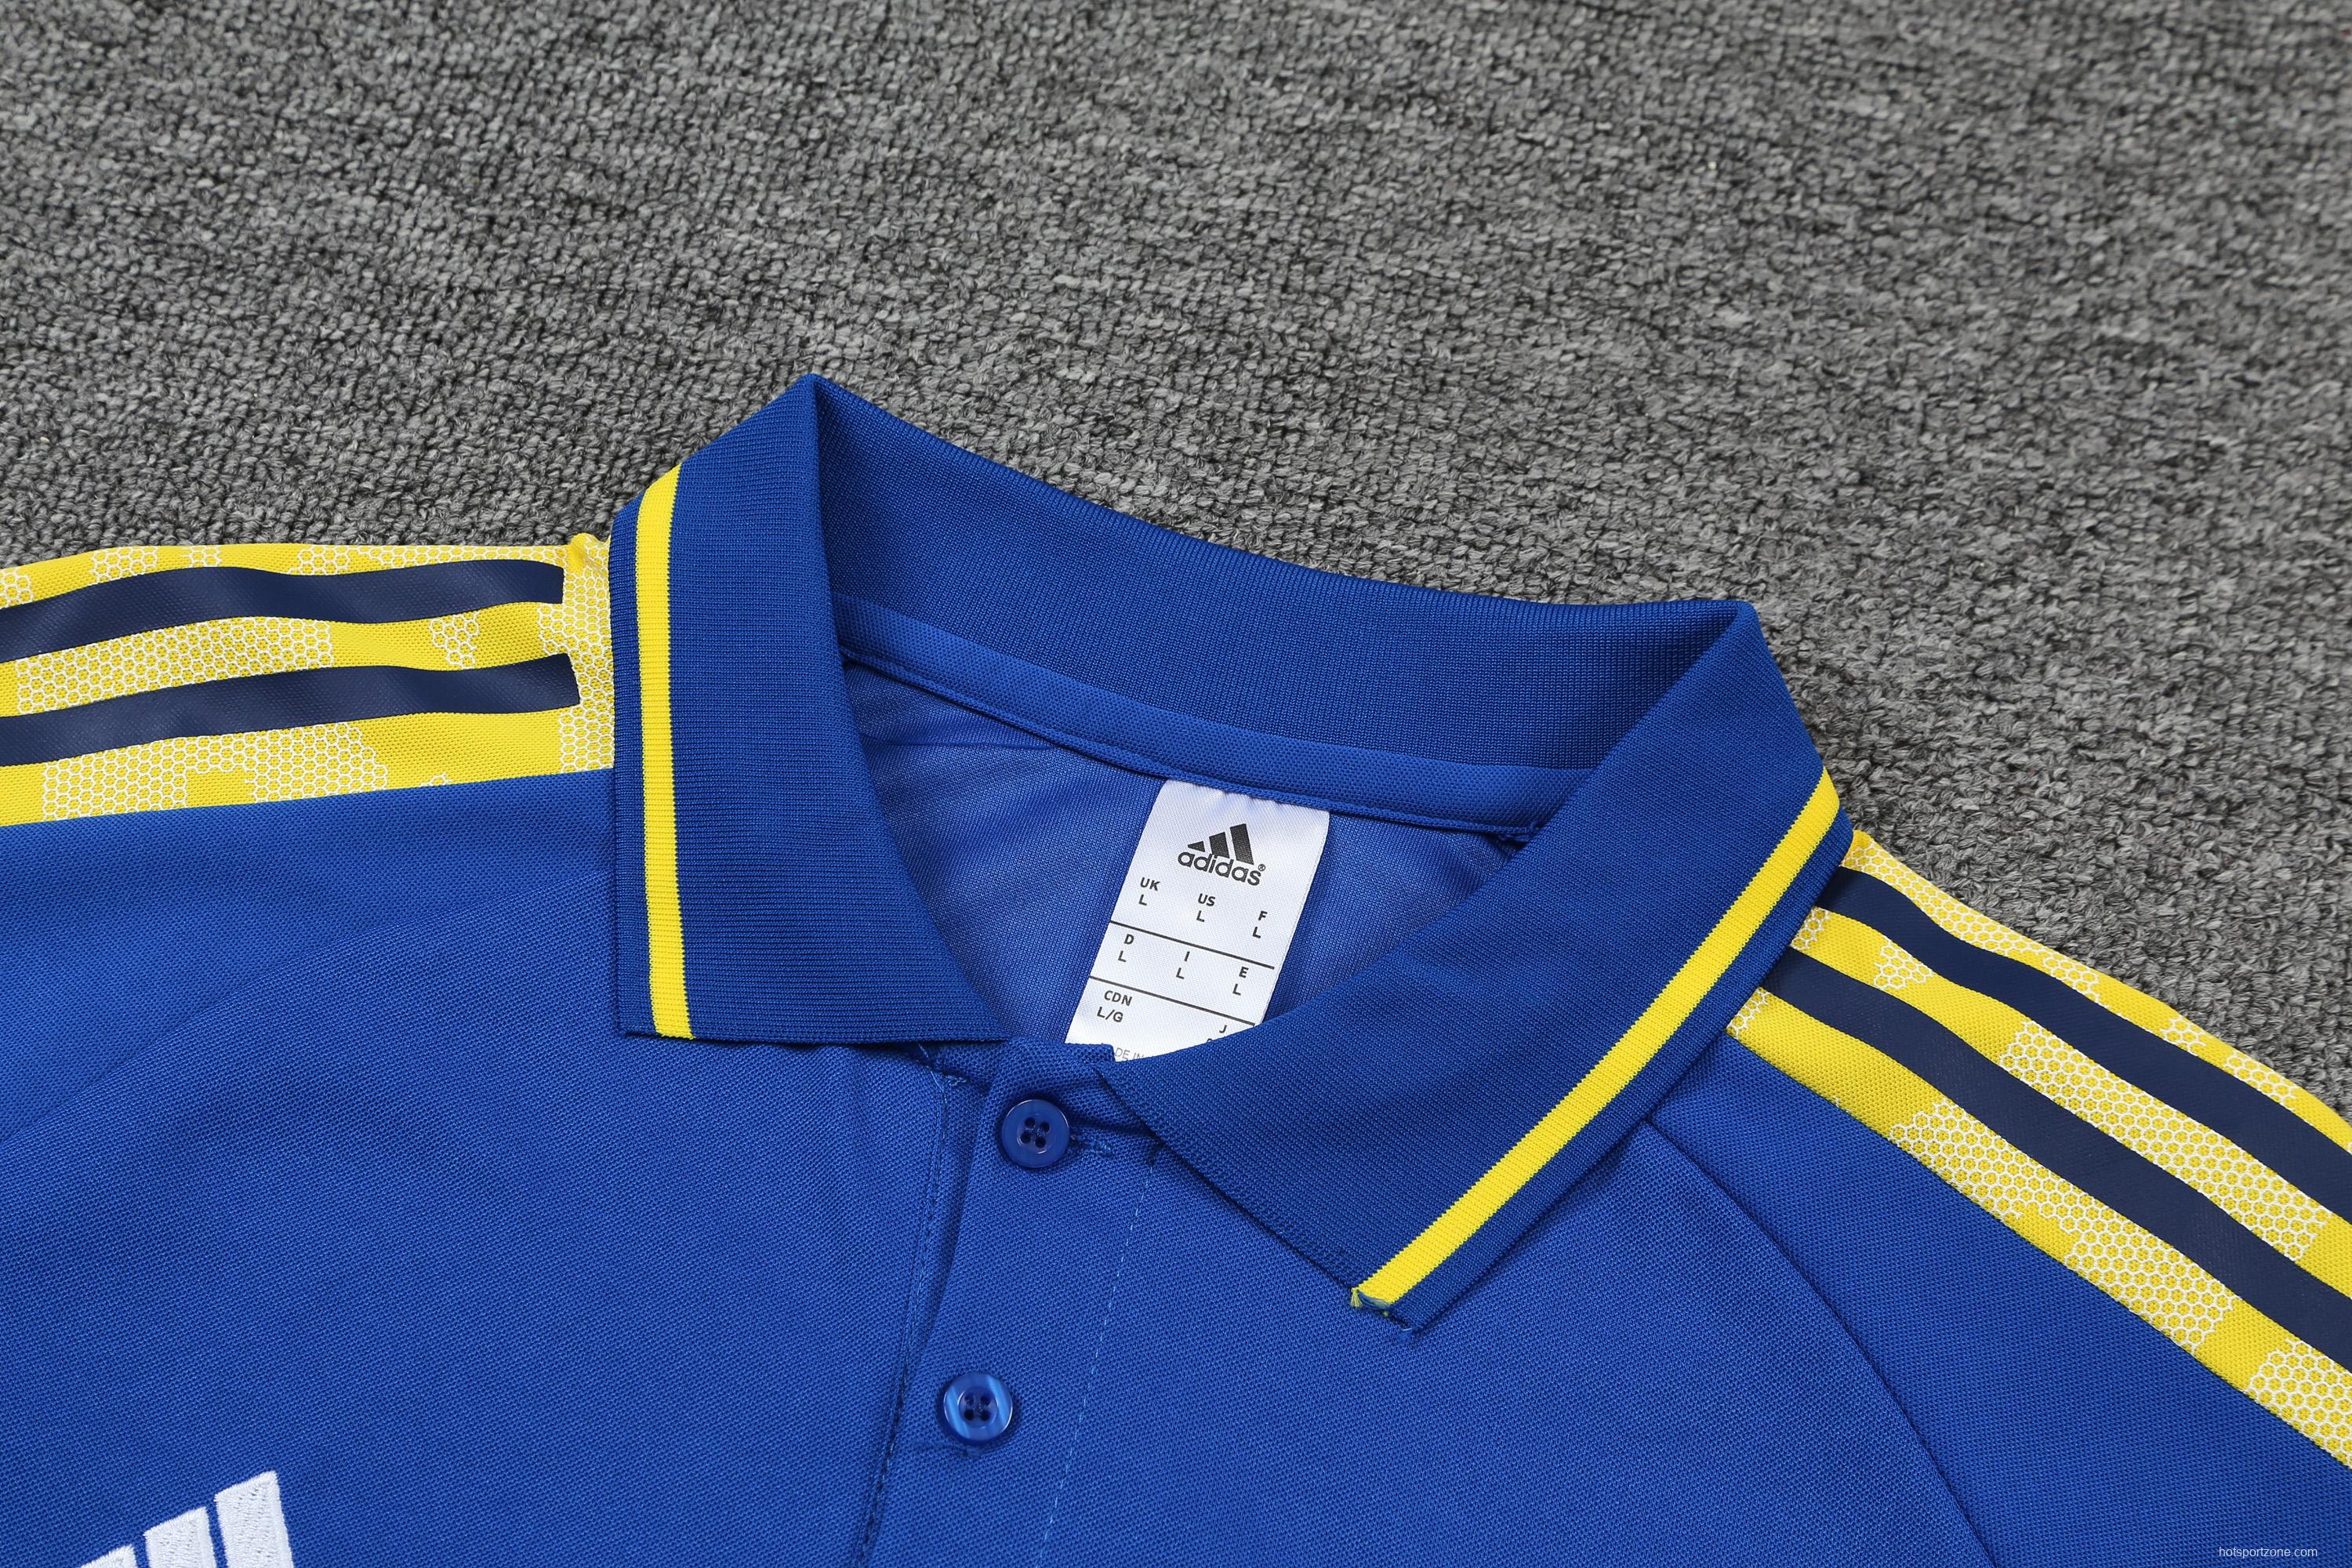 Juventus POLO kit blue and yellow stripes(not supported to be sold separately)